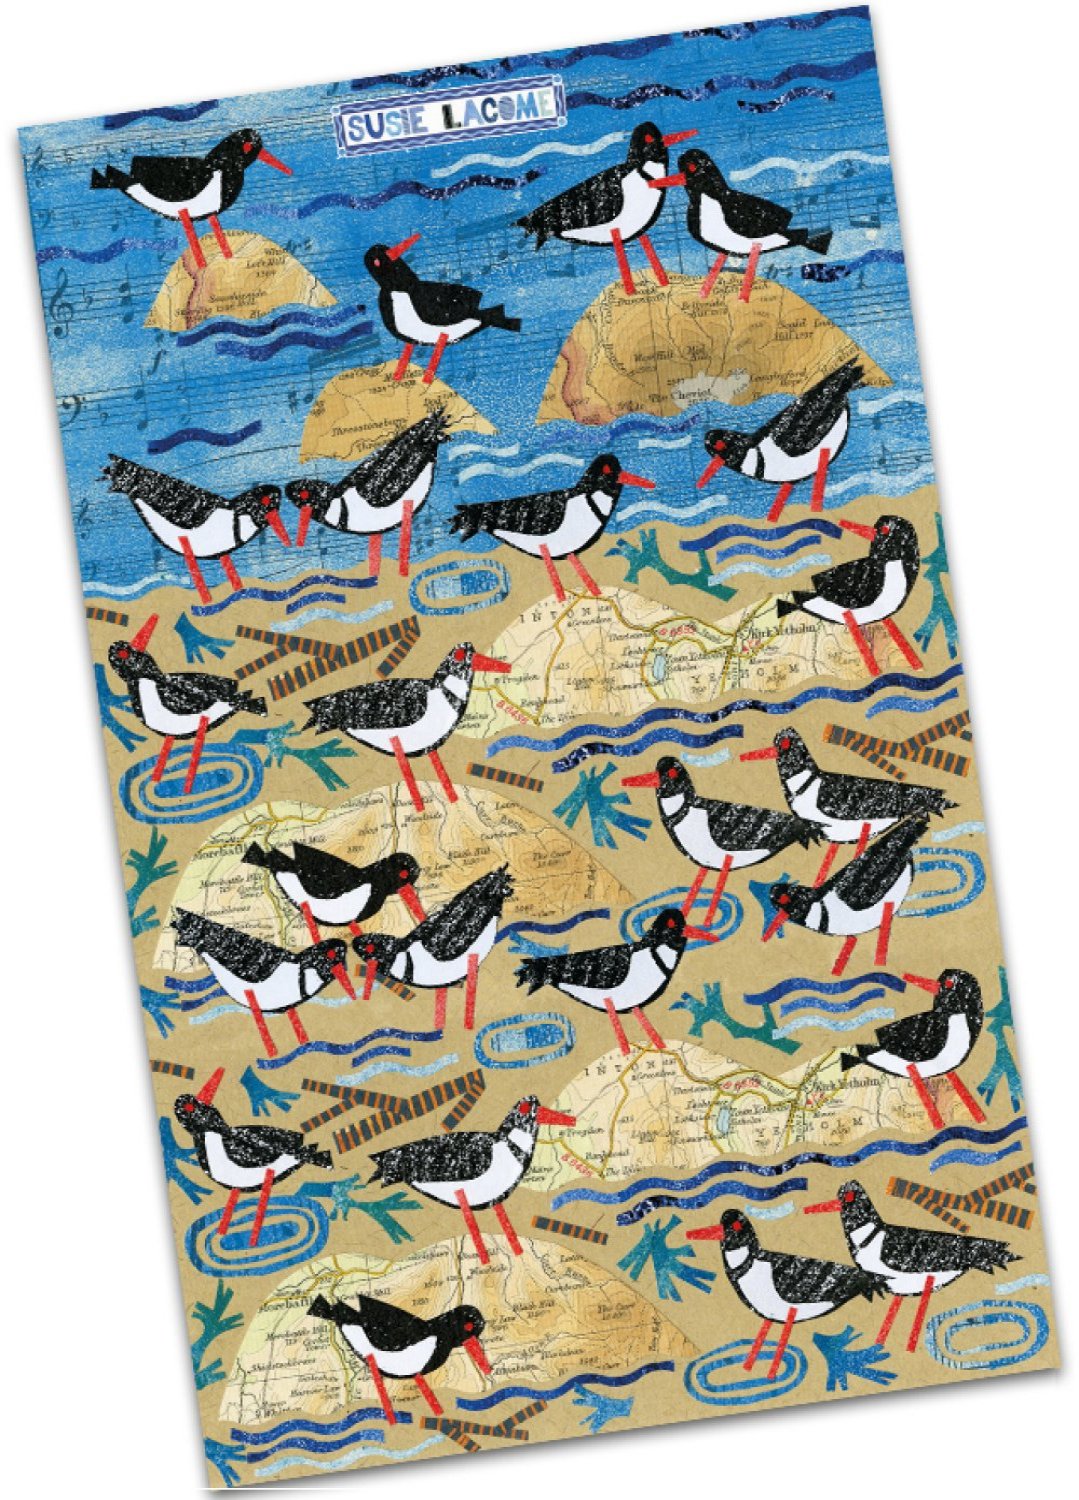 Emma Ball " Susie Lacome Oyster Catchers", Pure cotton tea towel. Printed in the UK.